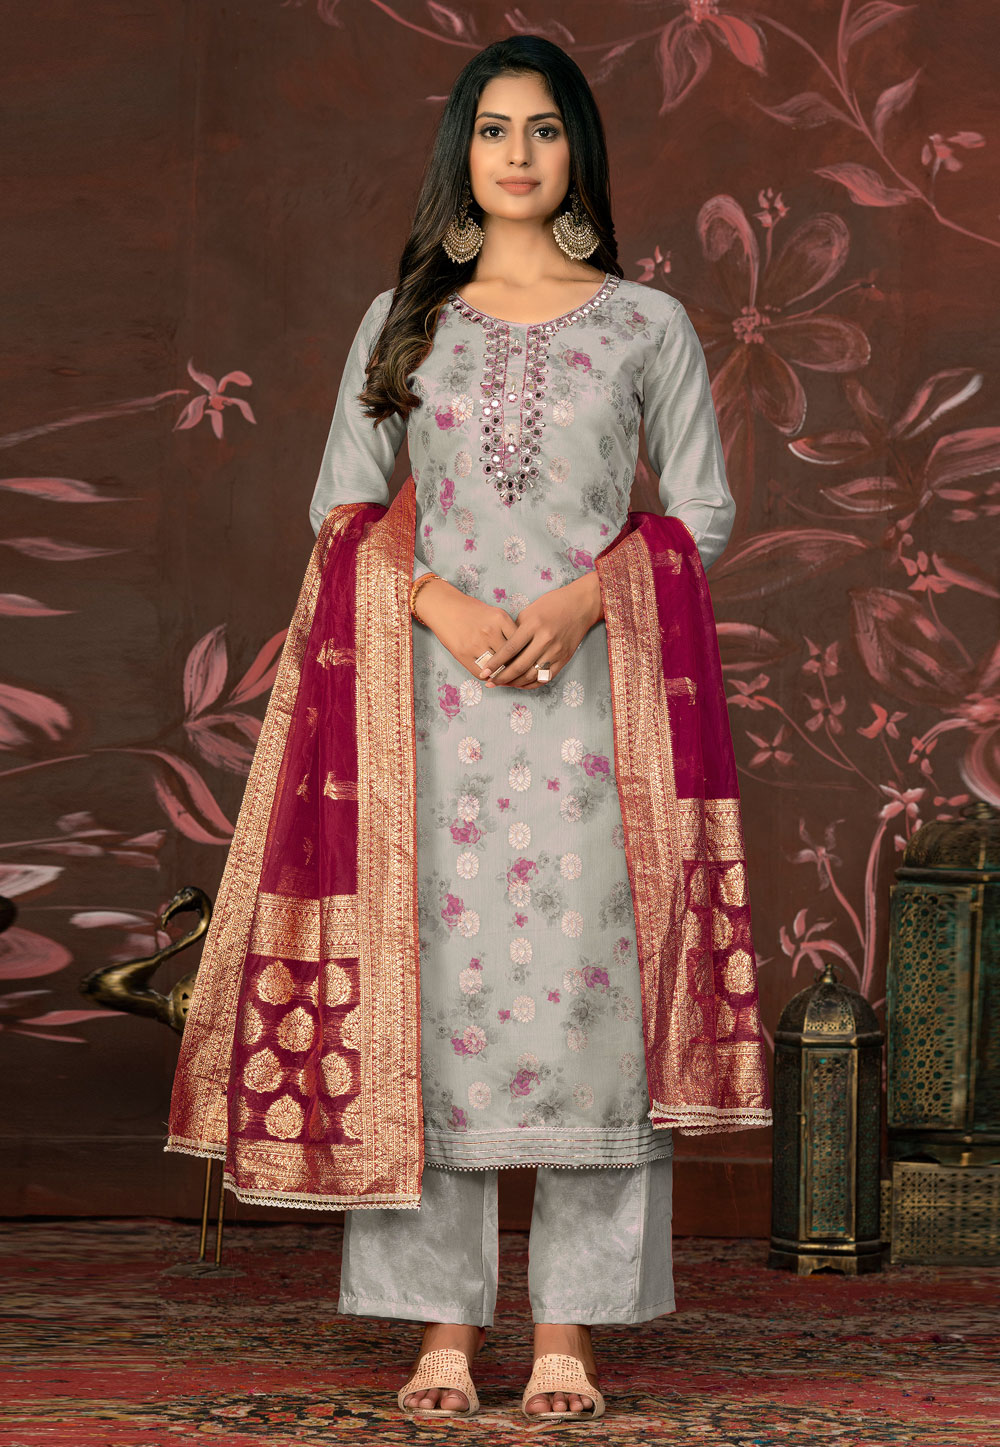 Indian Pakistani Girls Embroidered Mirror Work Lawn /Cotton Kameez Trouser  Suits | eBay